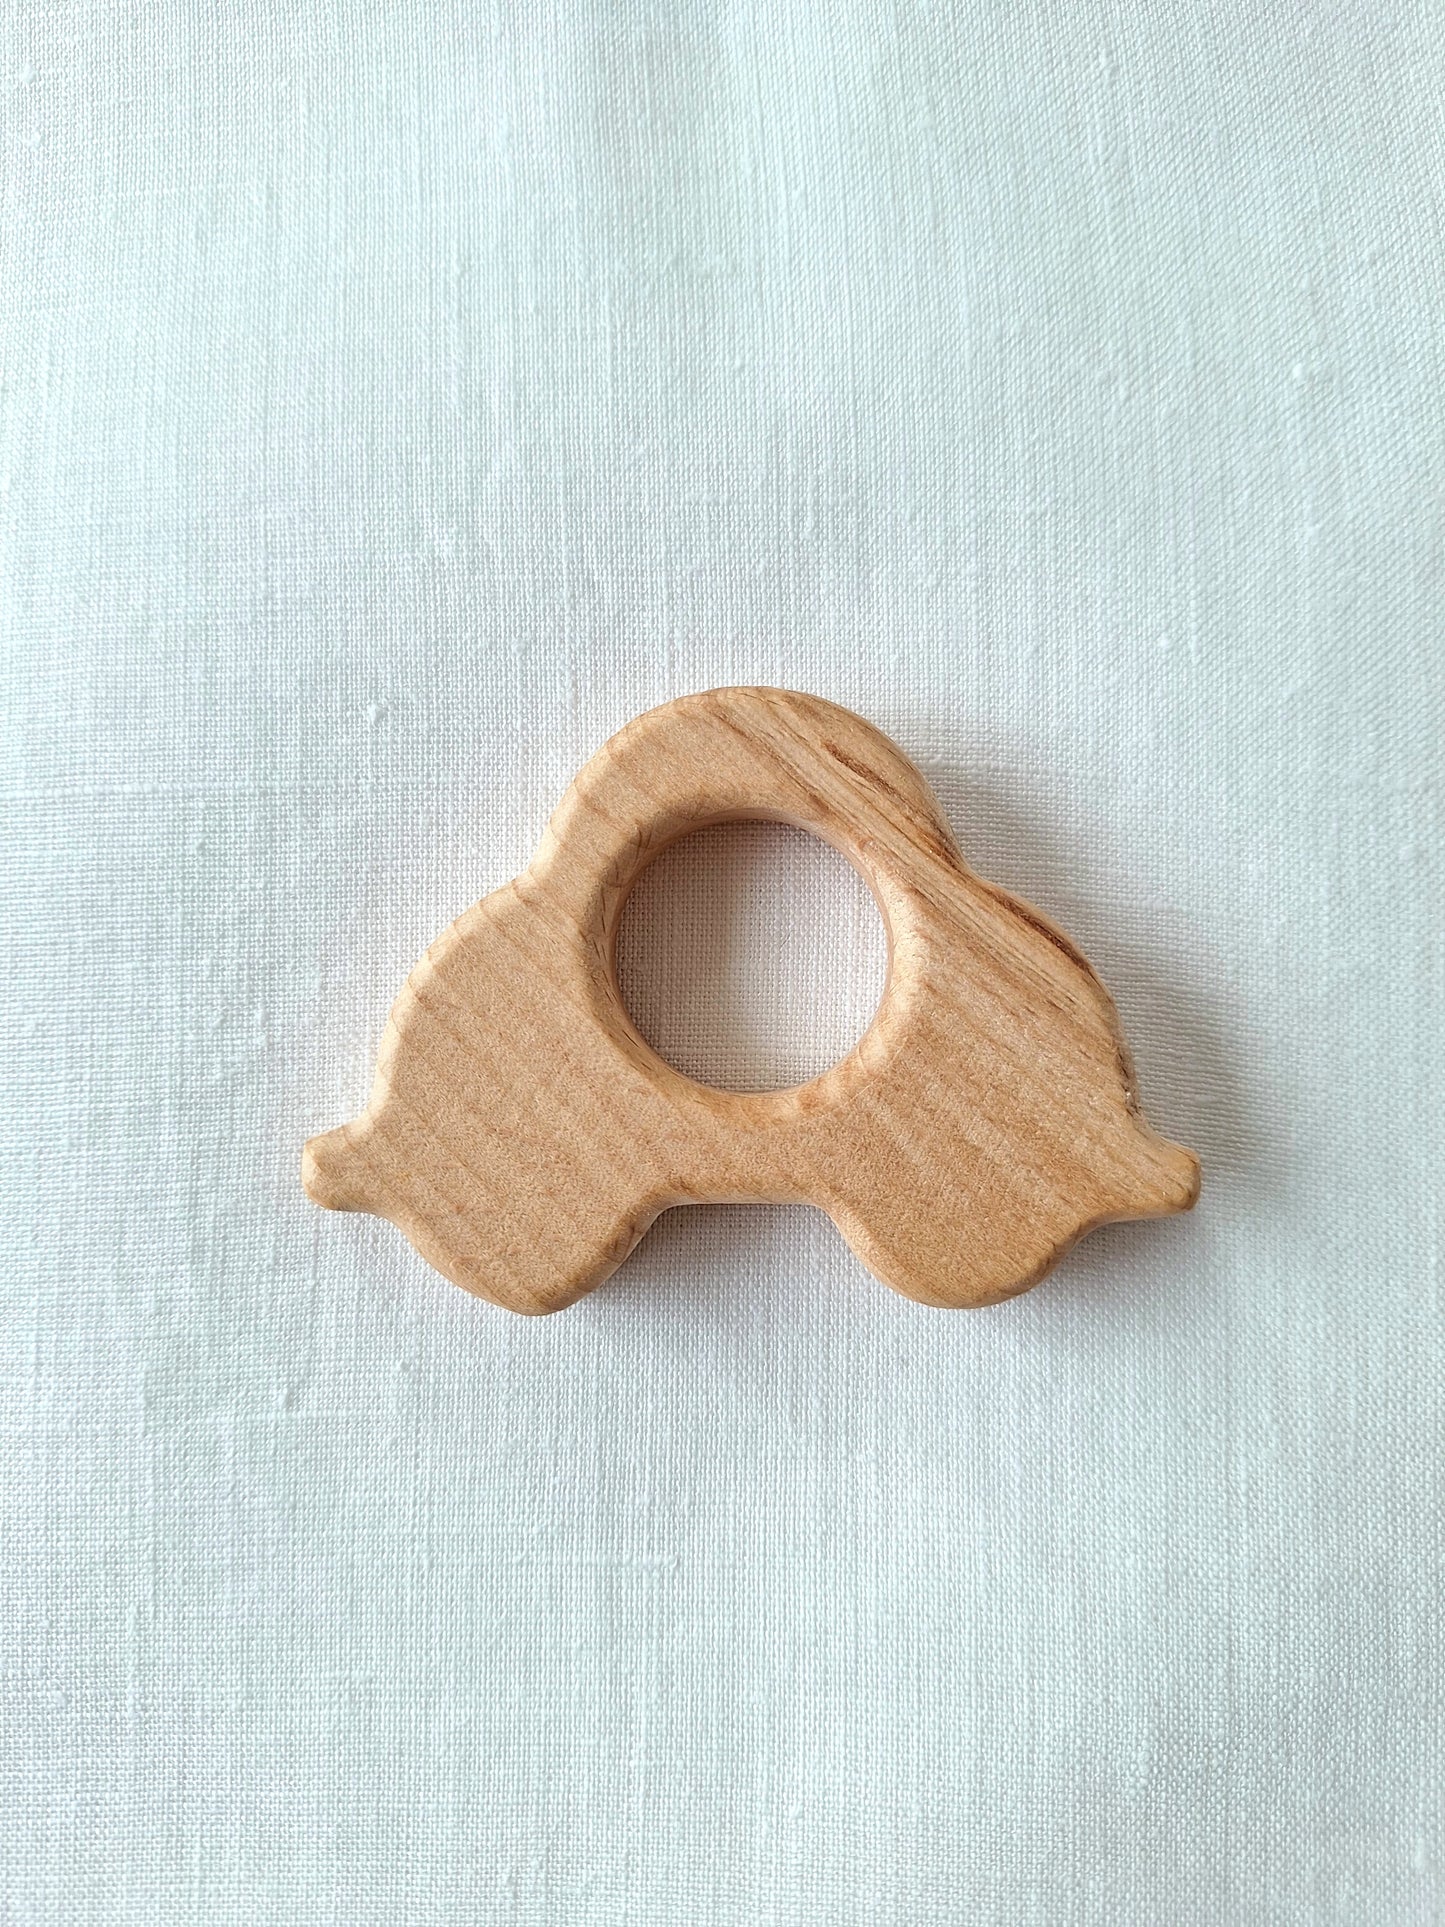 Wooden Teether Toys